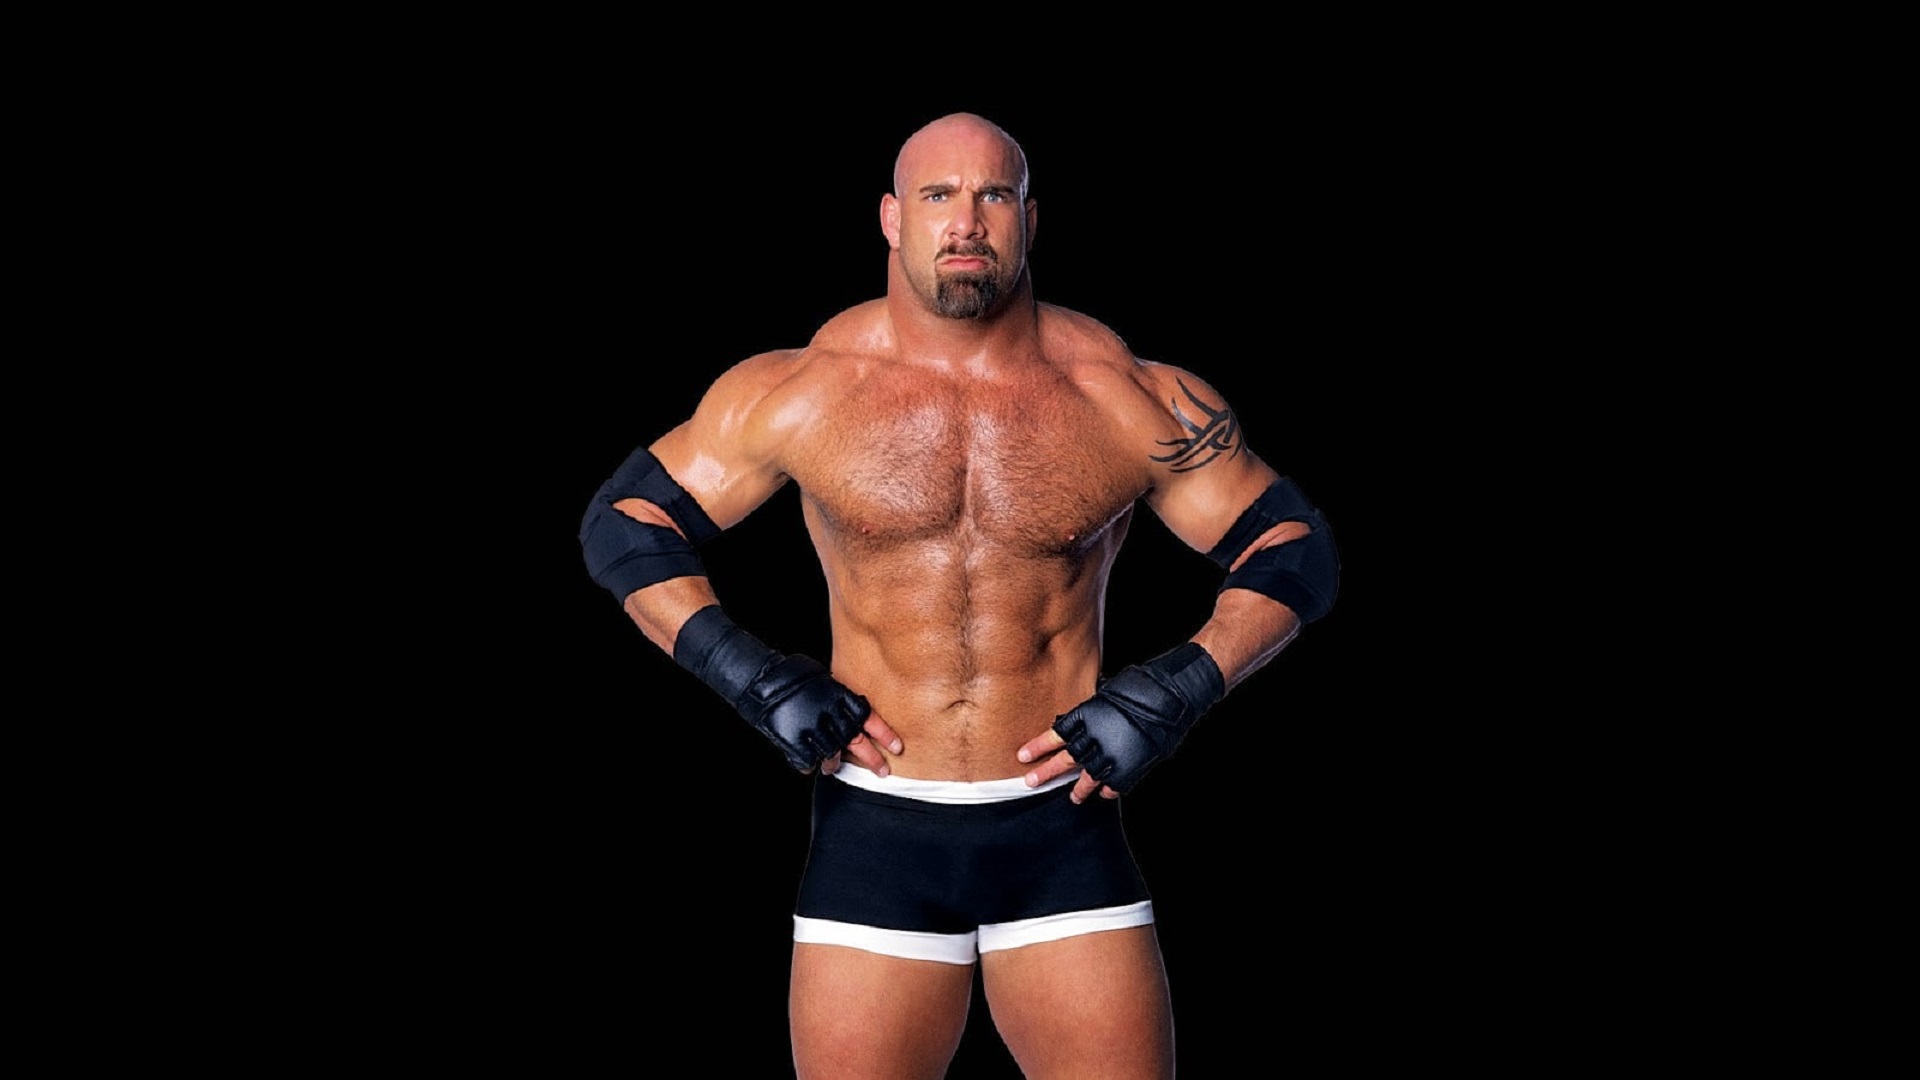 Bill Goldberg Wallpaper Image Photos Pictures Background